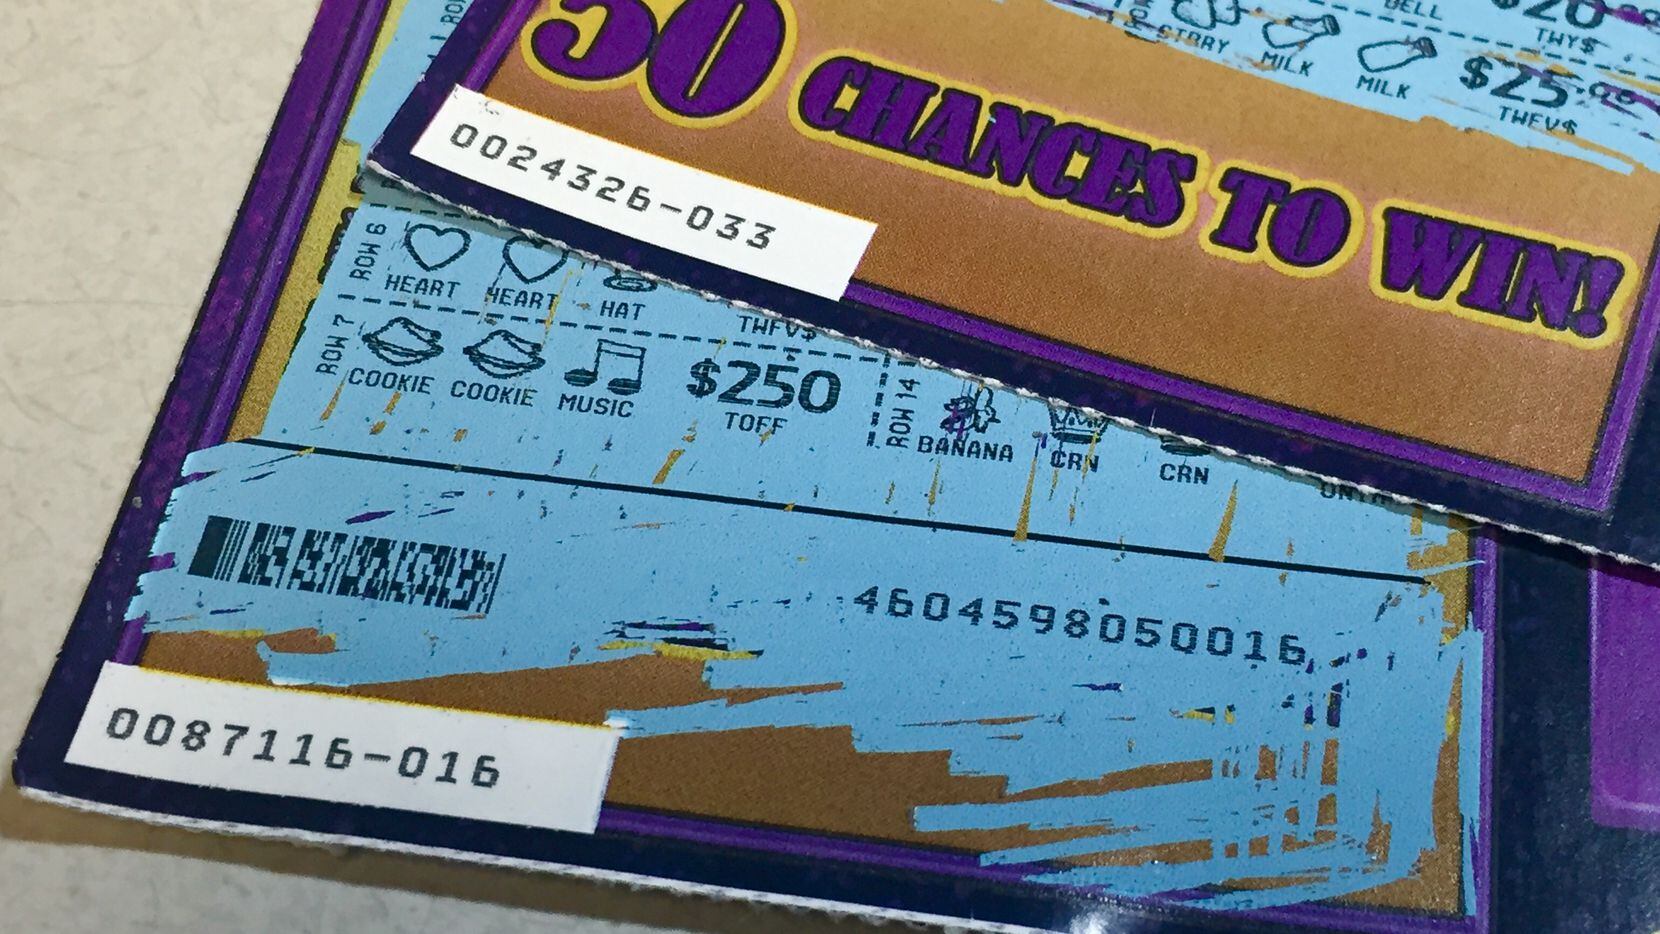 A $7.25 million Texas Lottery ticket purchased in Irving has not yet been claimed.